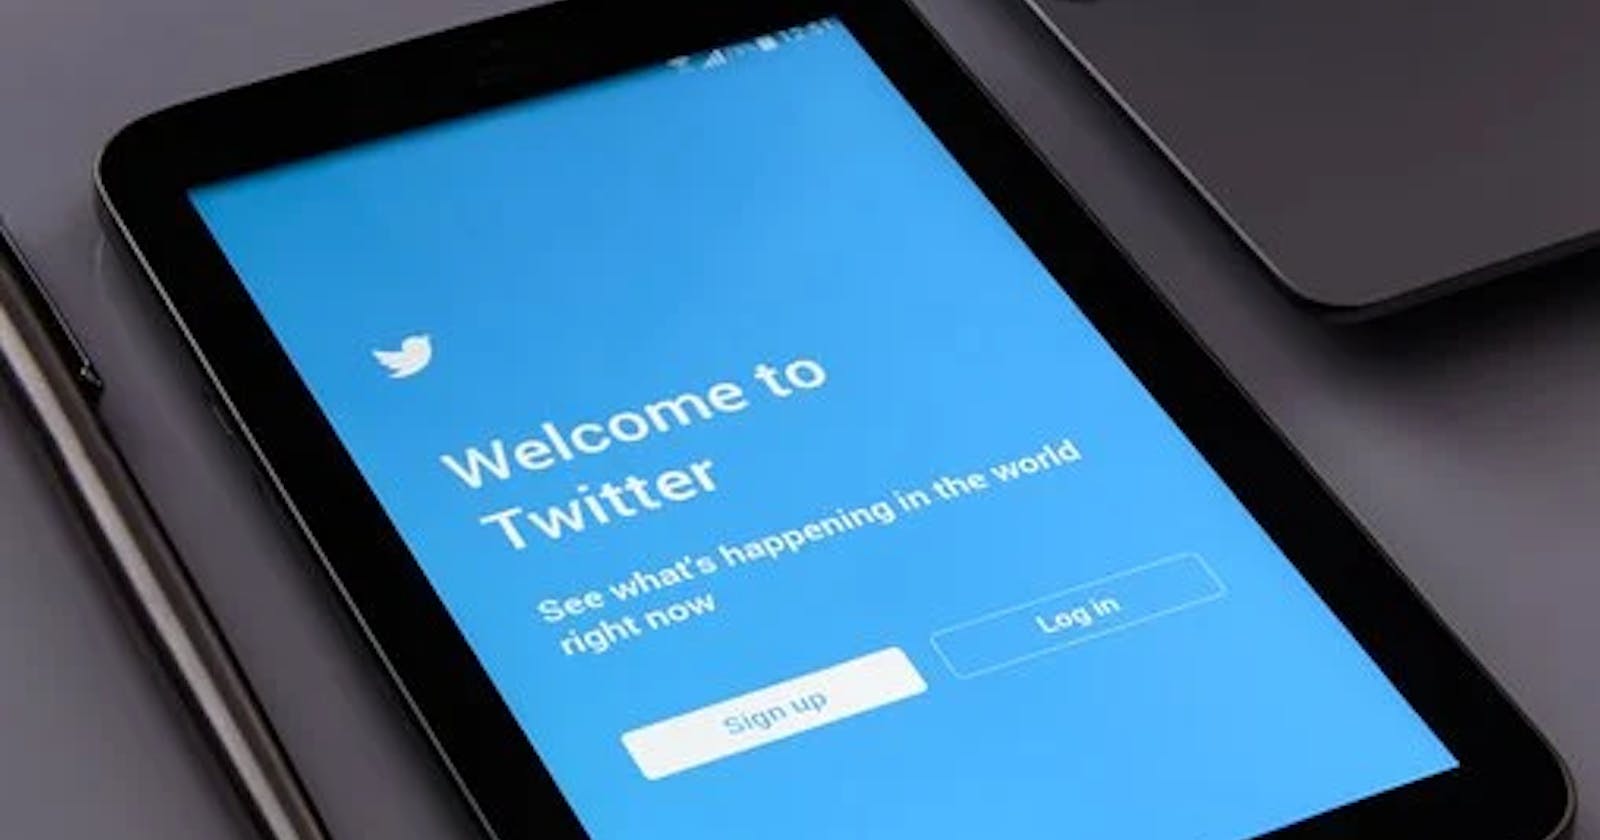 Implementing twitter authentication with firebase (flutter)